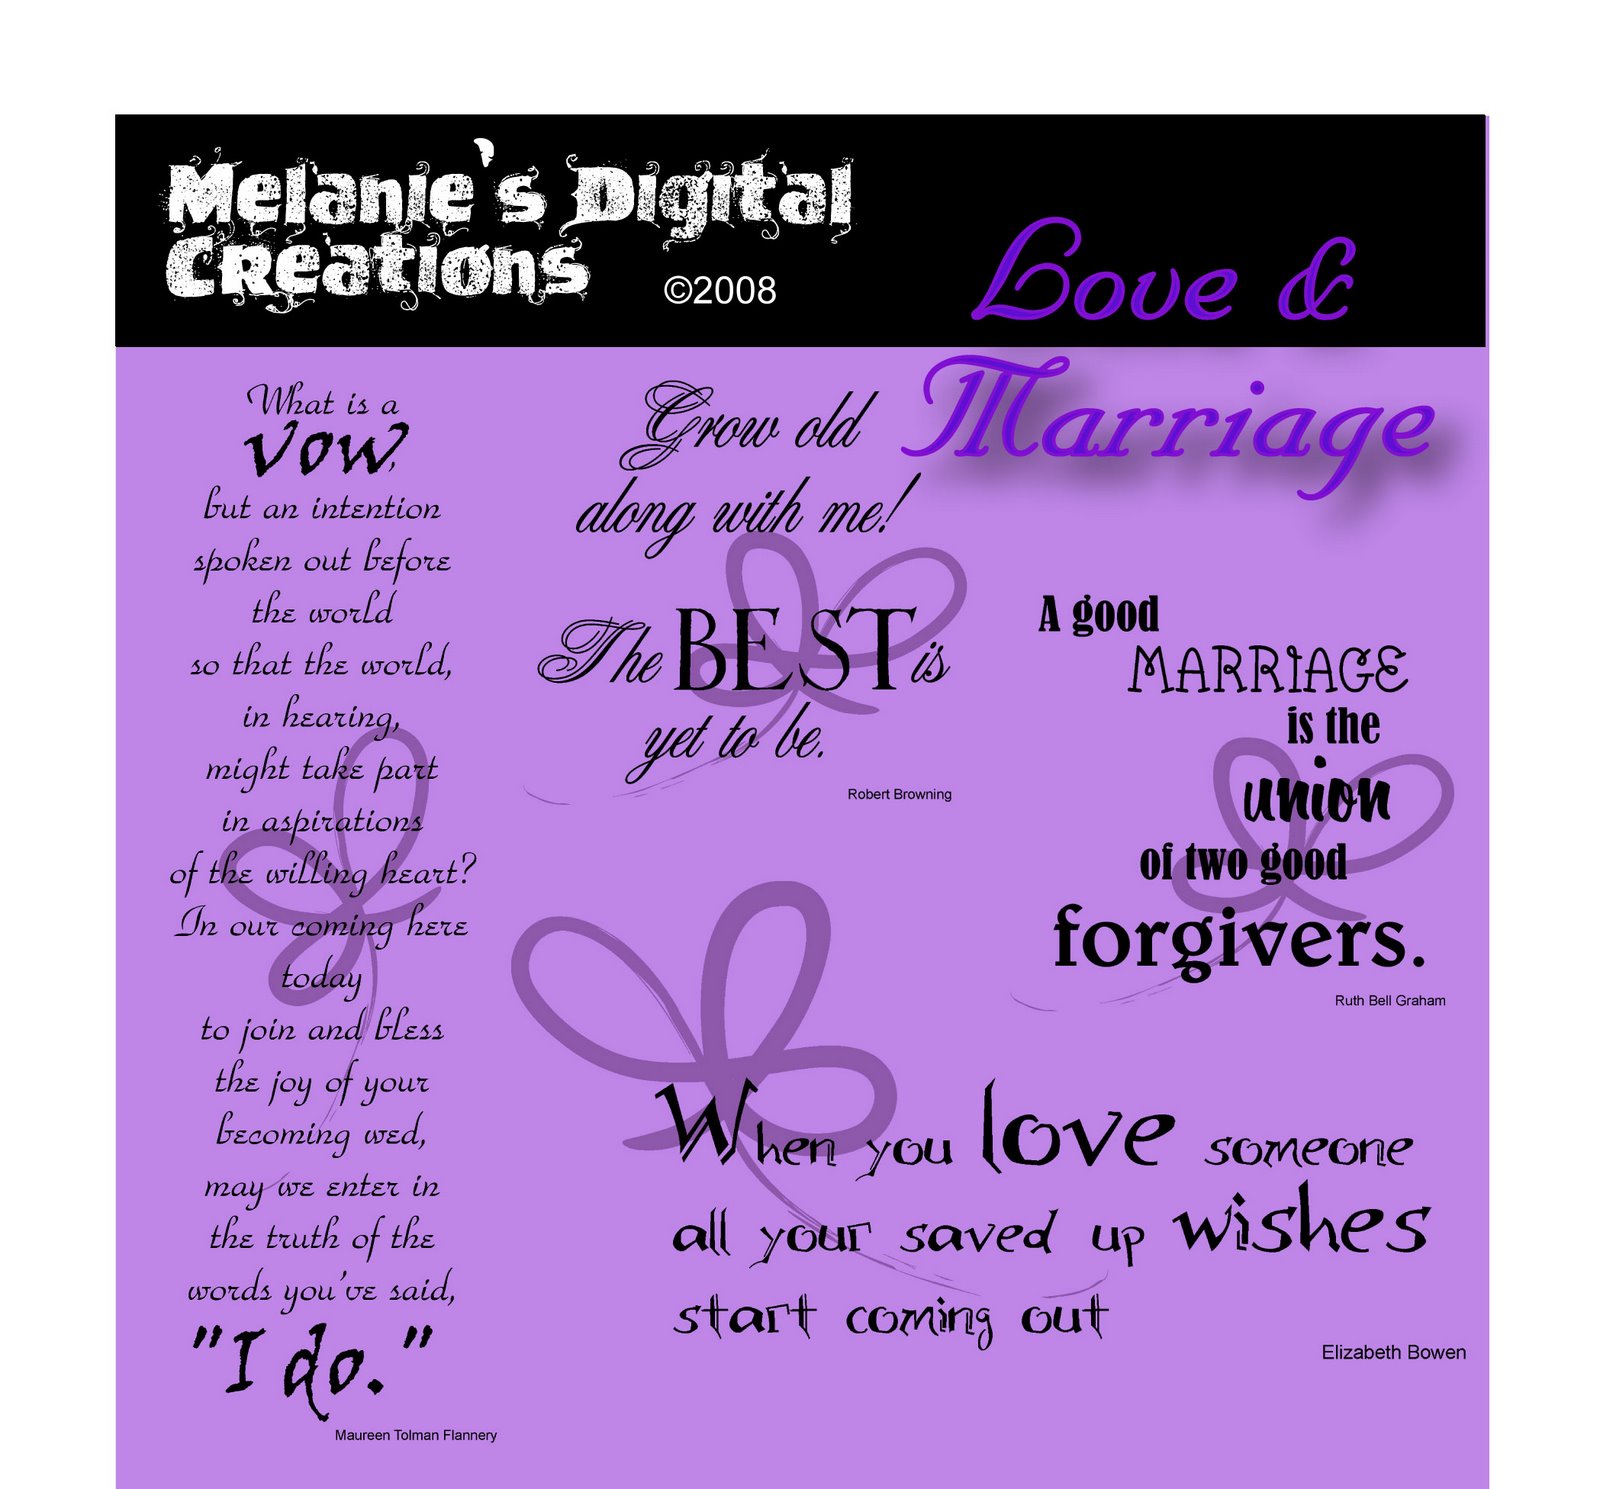 [MMDC+Love&Marriage+preview.jpg]